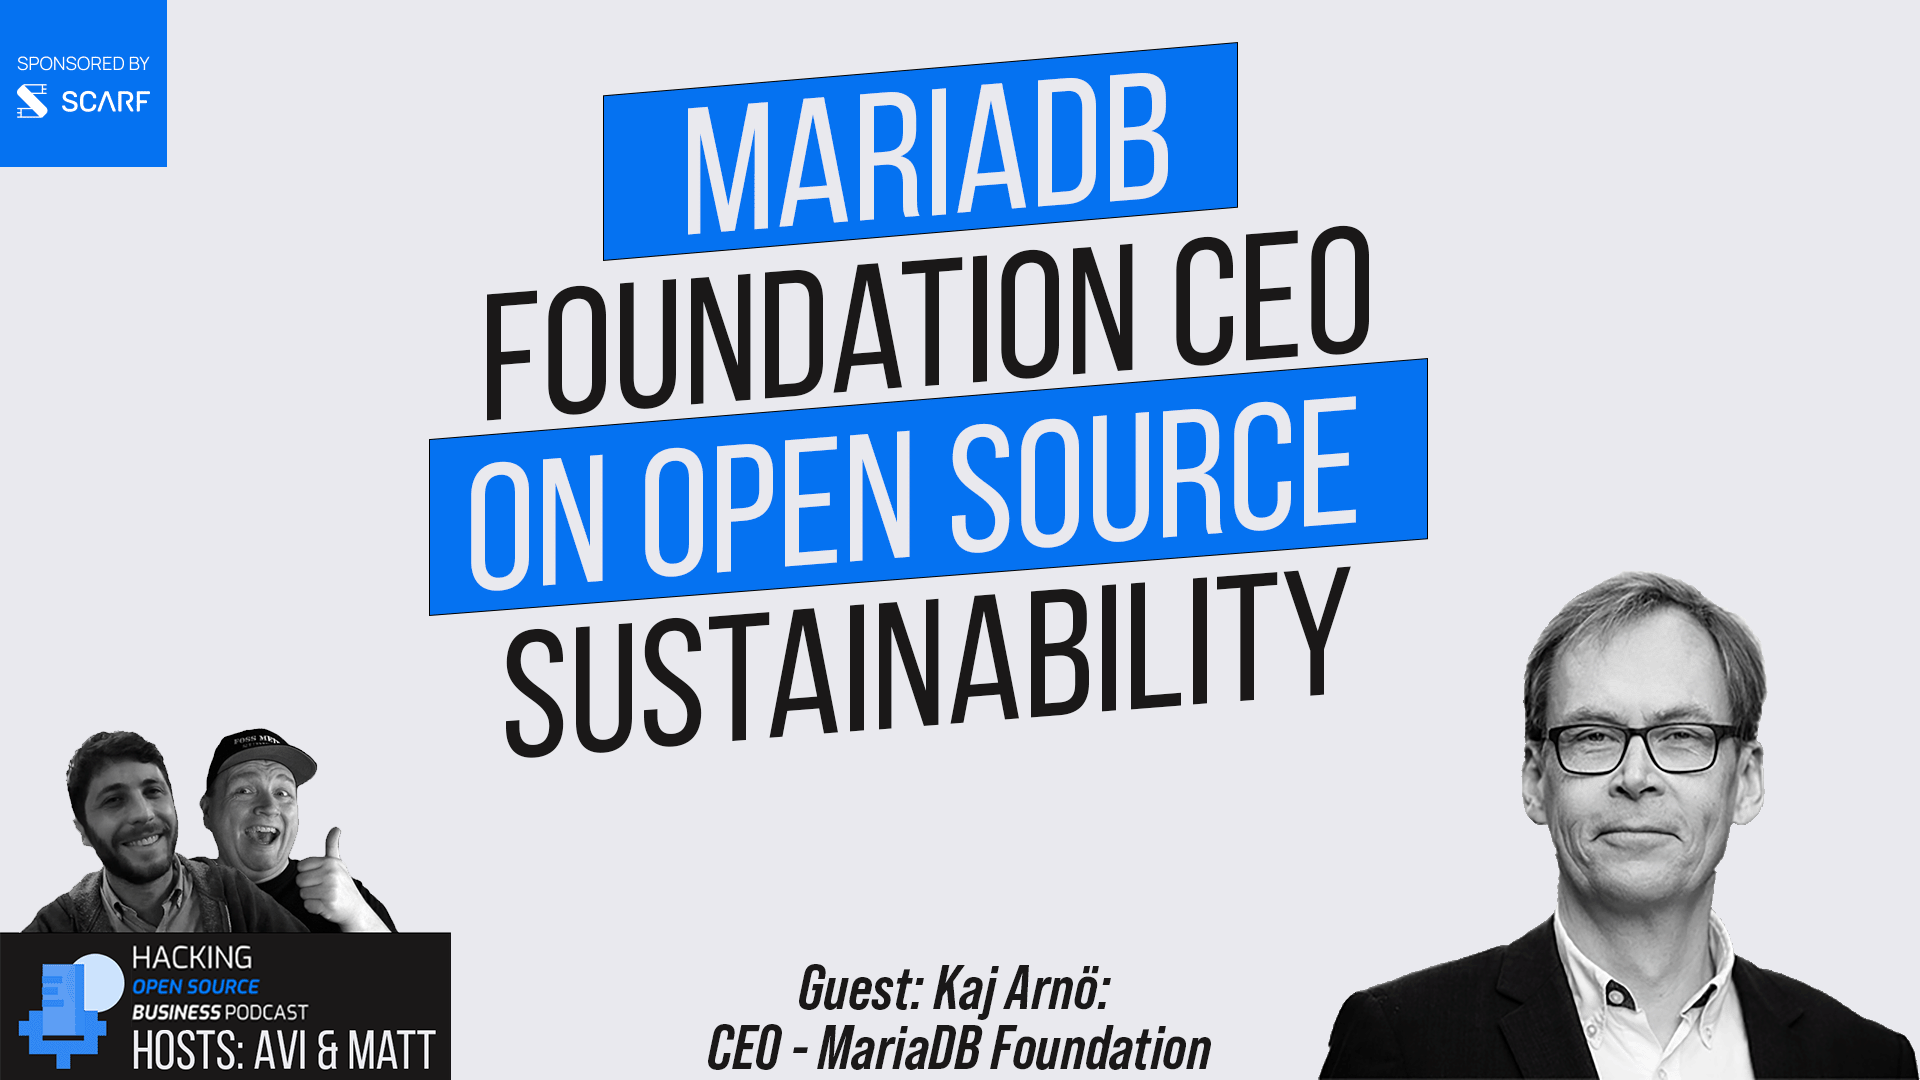 MariaDB Foundation CEO Kaj Arnö on Open Source Sustainability and the Role of Foundations